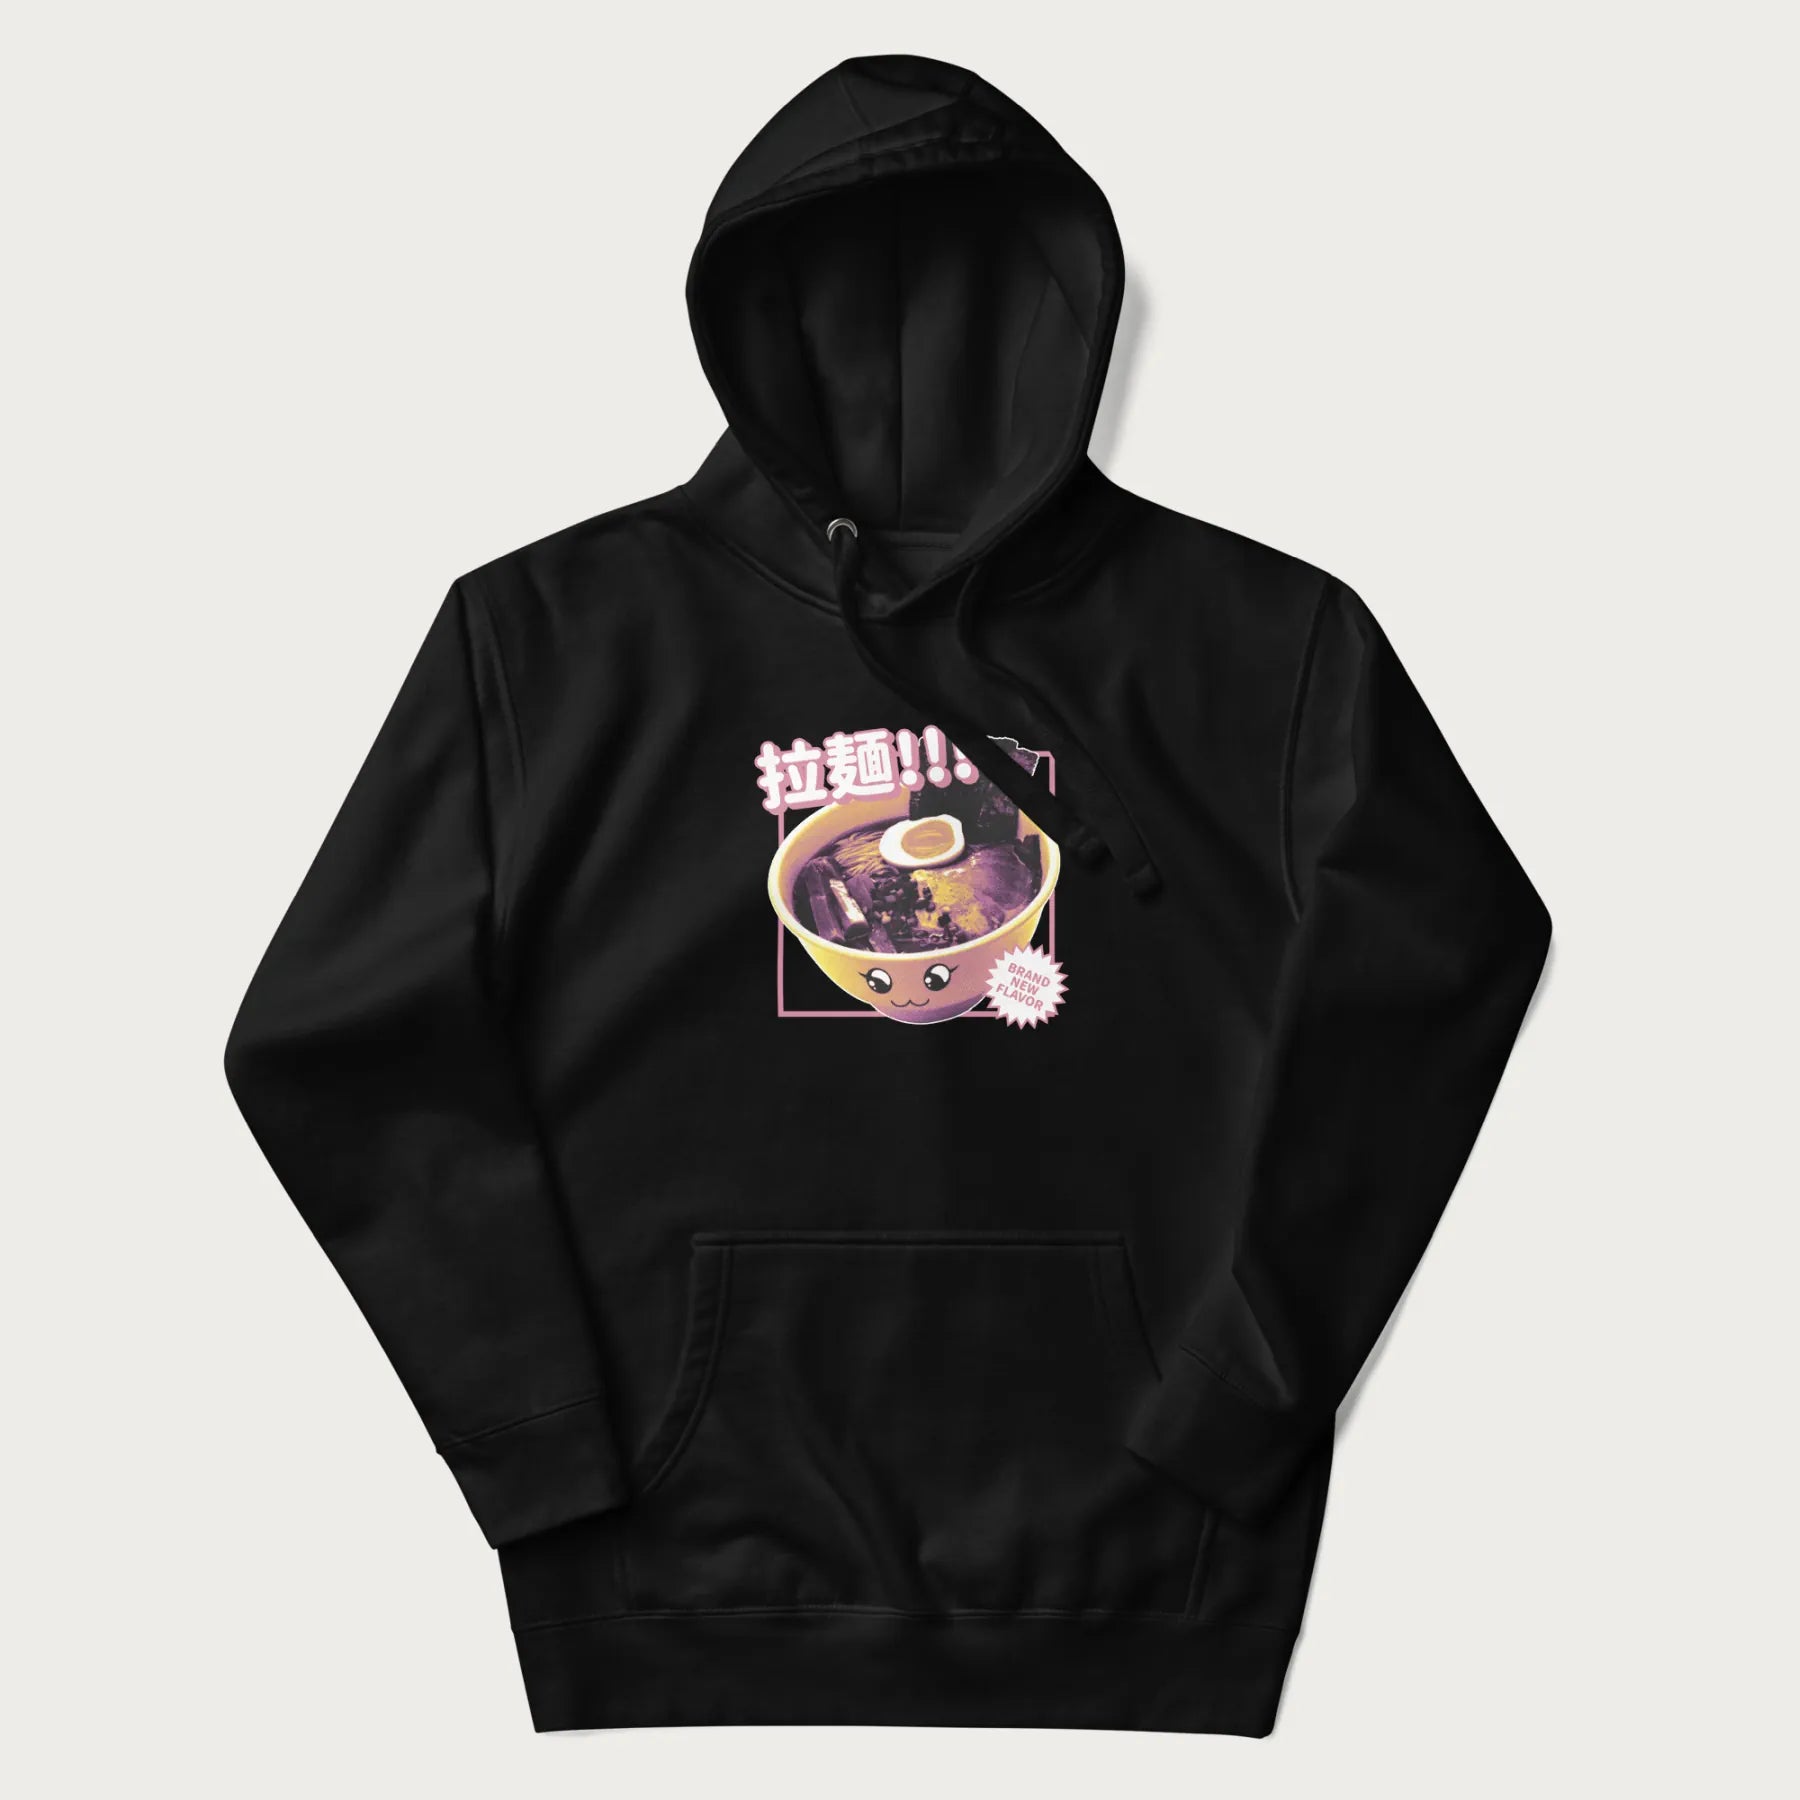 Black hoodie with Japanese text '拉麵!!!' (Ramen!!!) in vibrant pink and realistic ramen bowl graphic.